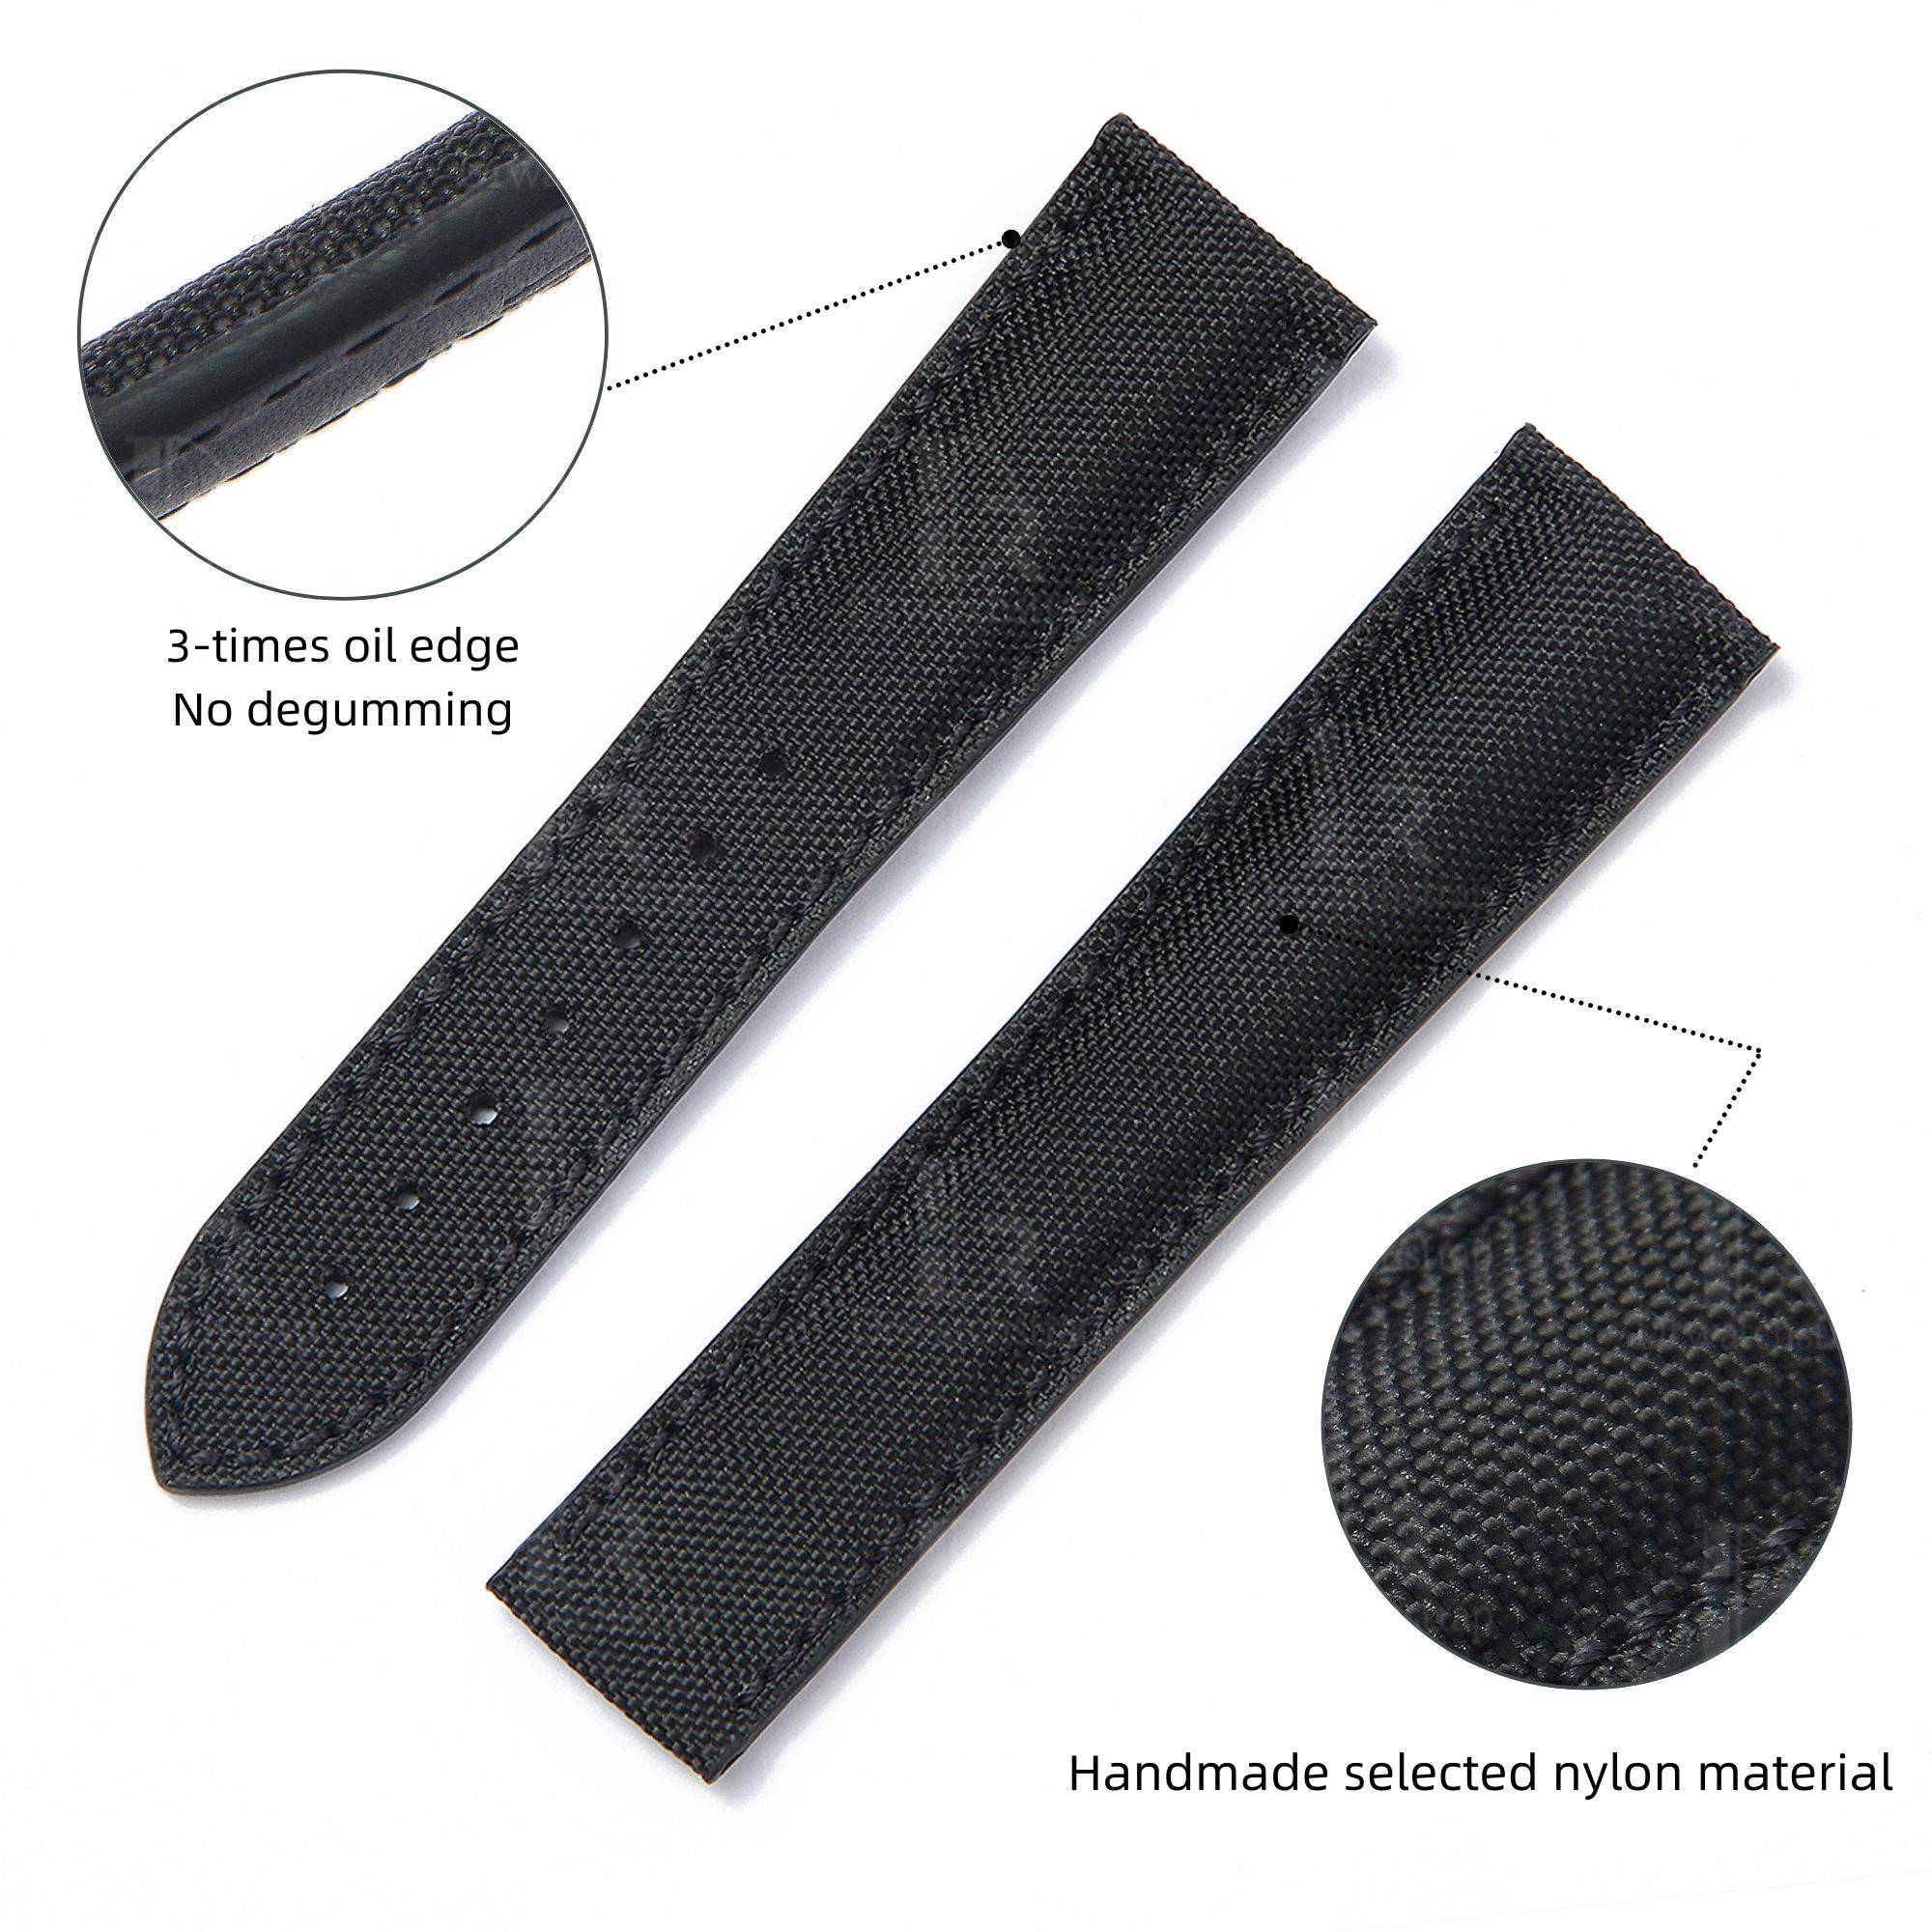 Custom nylon best Omega Speedmaster aftermarket straps 18mm 20mm handmade black canvas - Omega Seamaster watch band replacement online at a discount price aftermarket watch strap